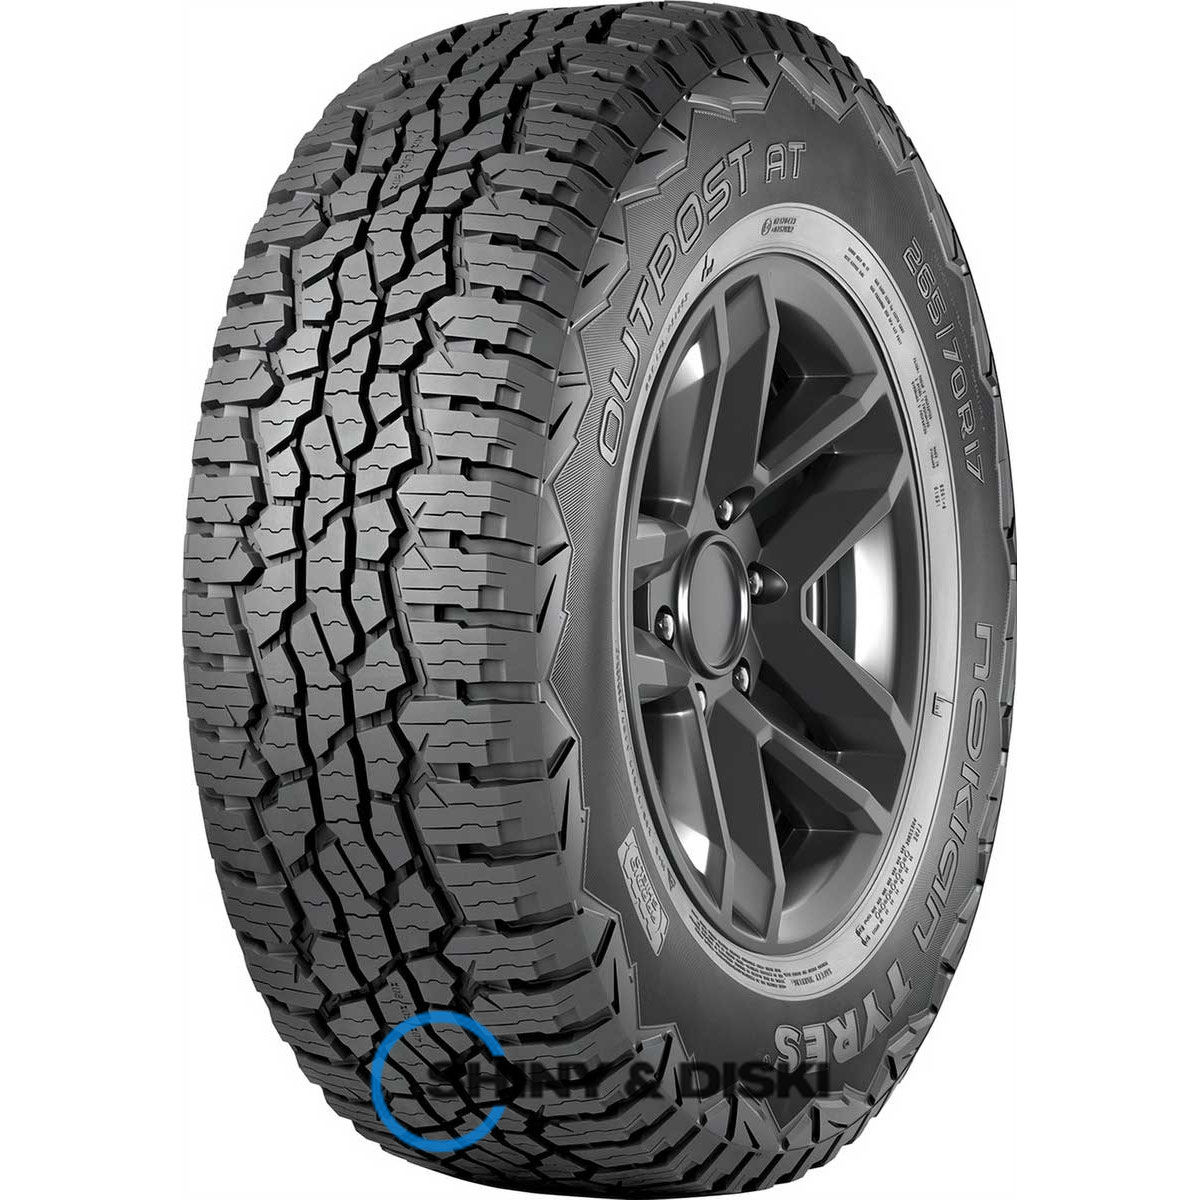 nokian outpost at 275/70 r17 121/118s